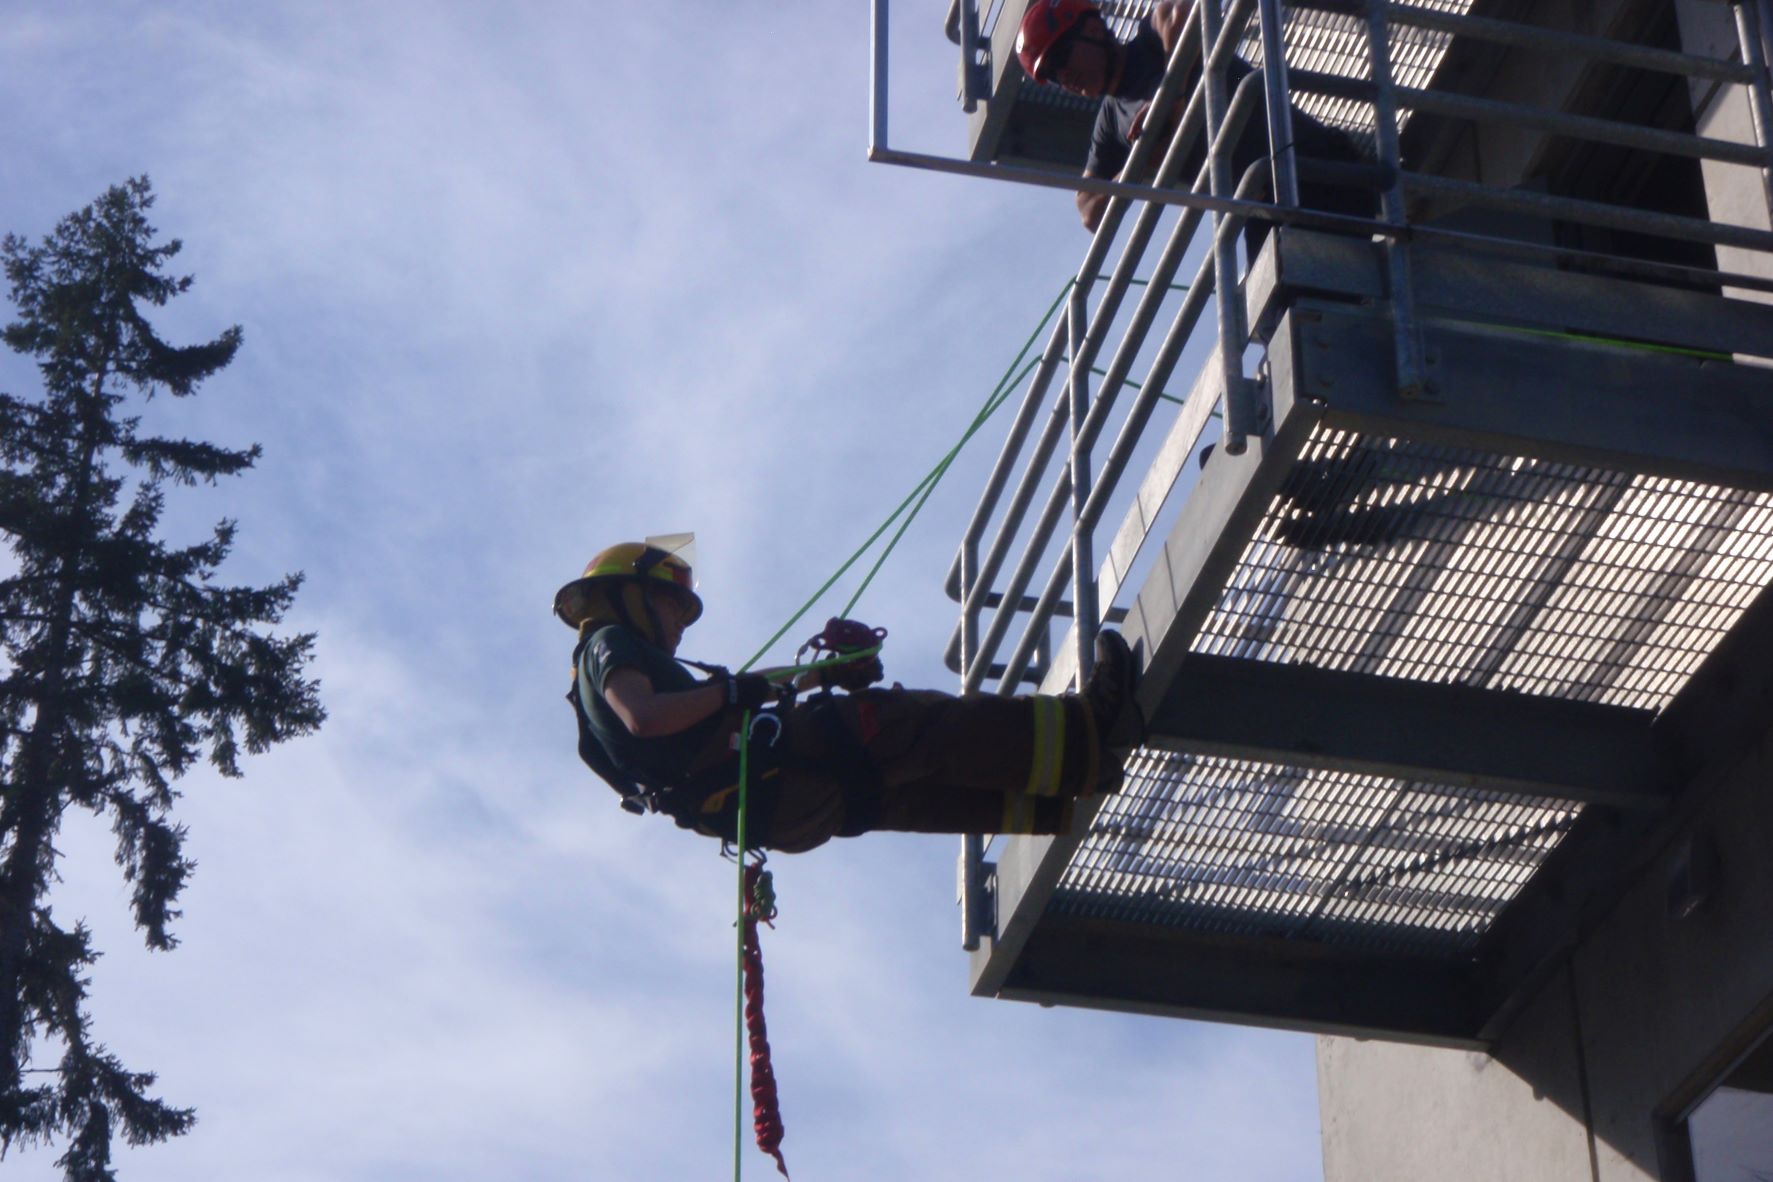 Fire Camp - Technical Rescue Training